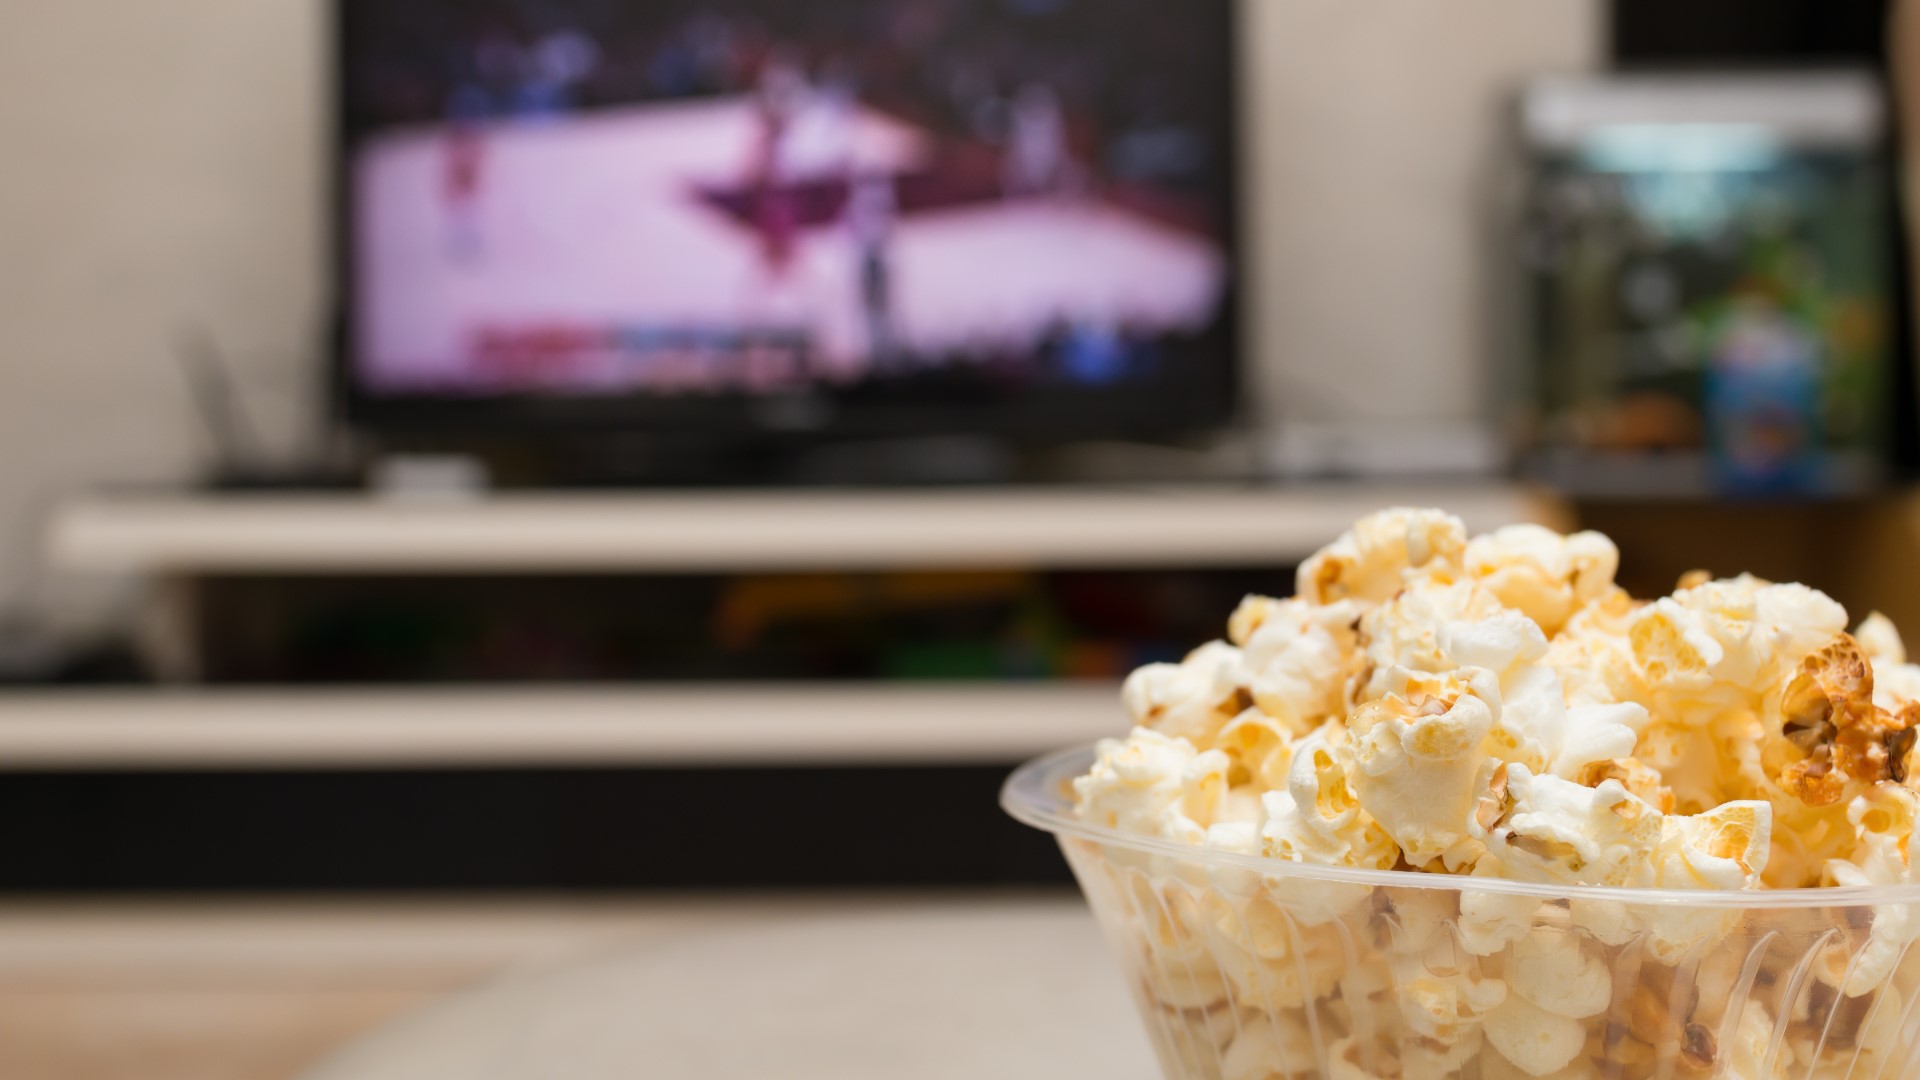 Registered Dietitian Amy Bragagnini shares tips for ways to snack healthy while watching your favorite shows.